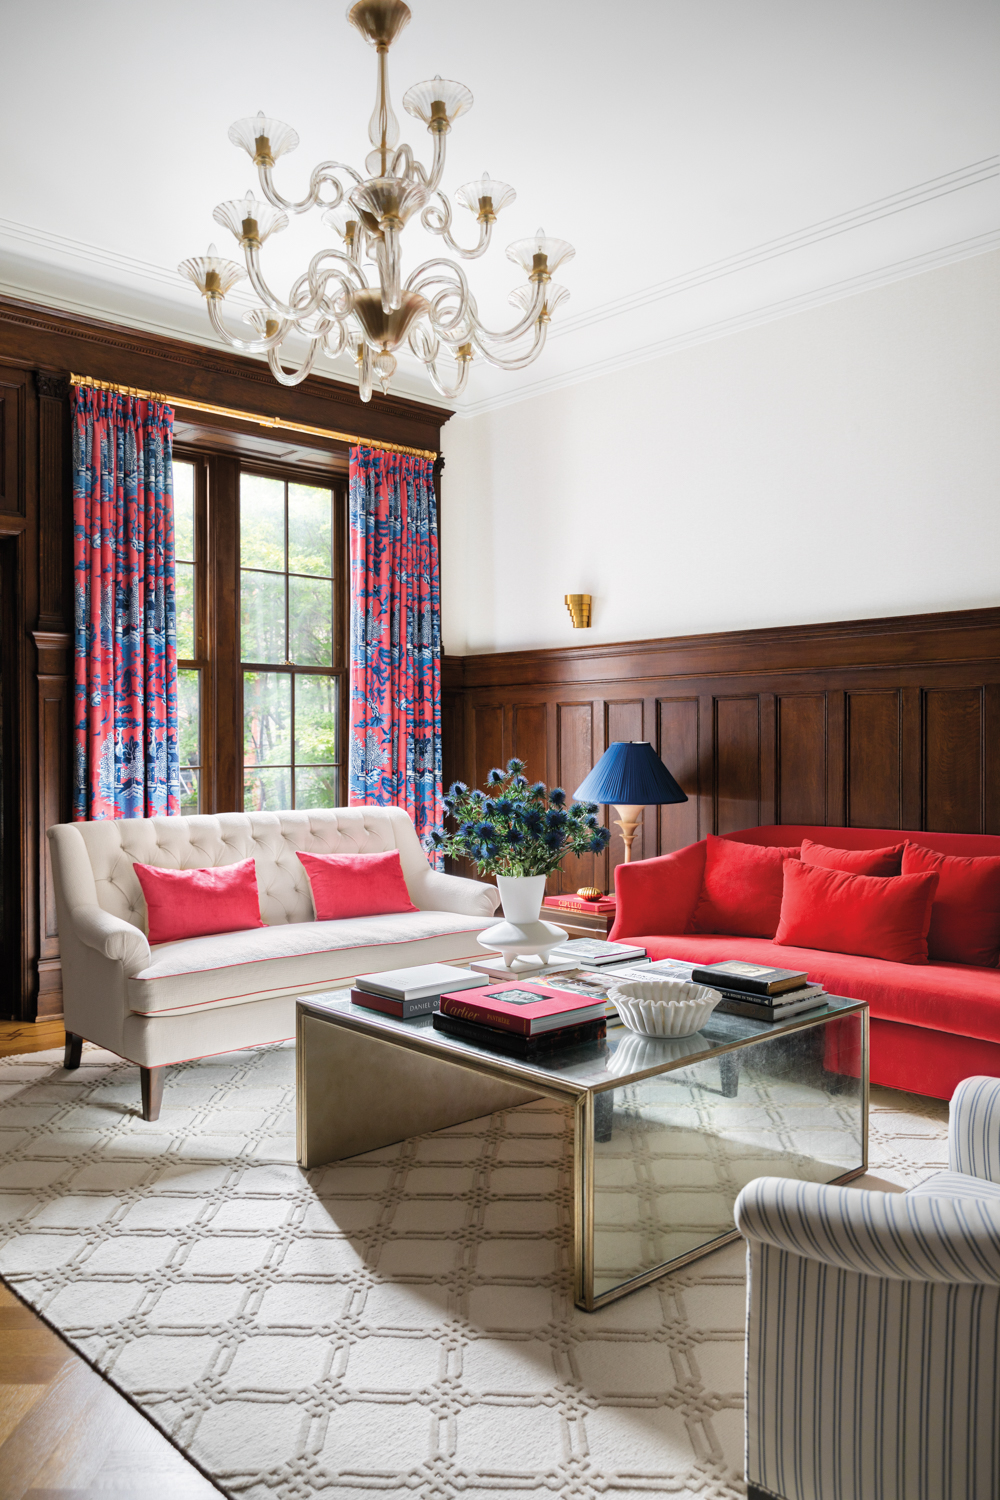 Fancy Meets Family Fun In This Restored Harlem Brownstone